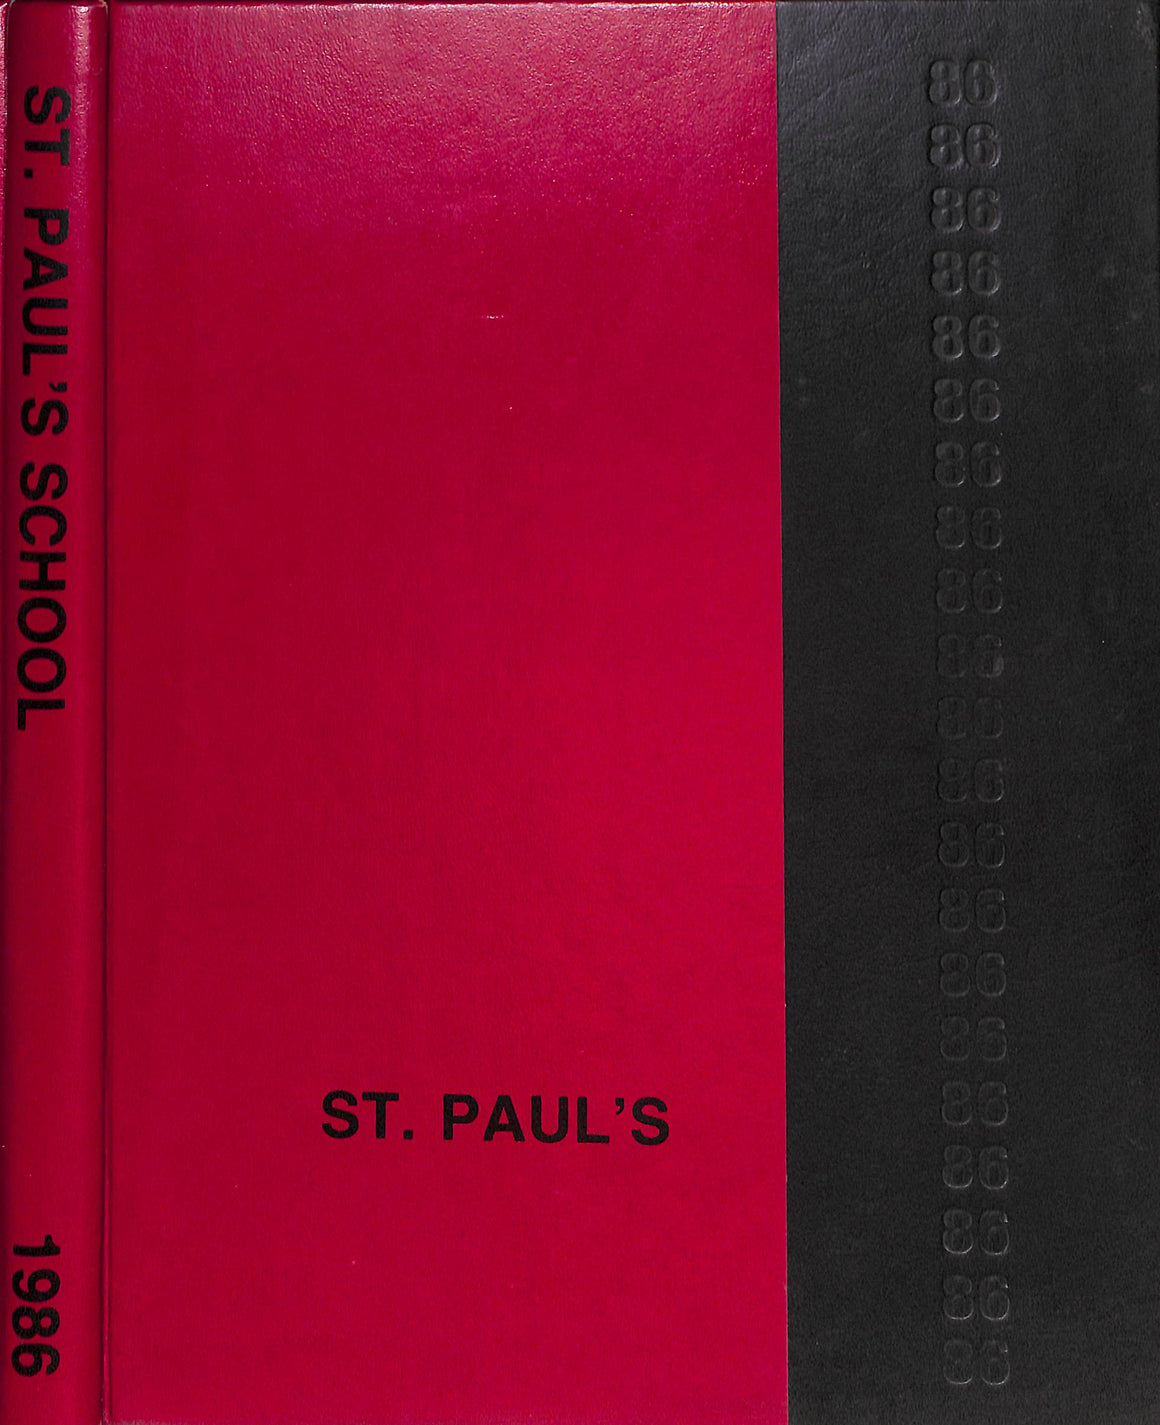 "St Paul's School Concord, NH 1986 Yearbook"